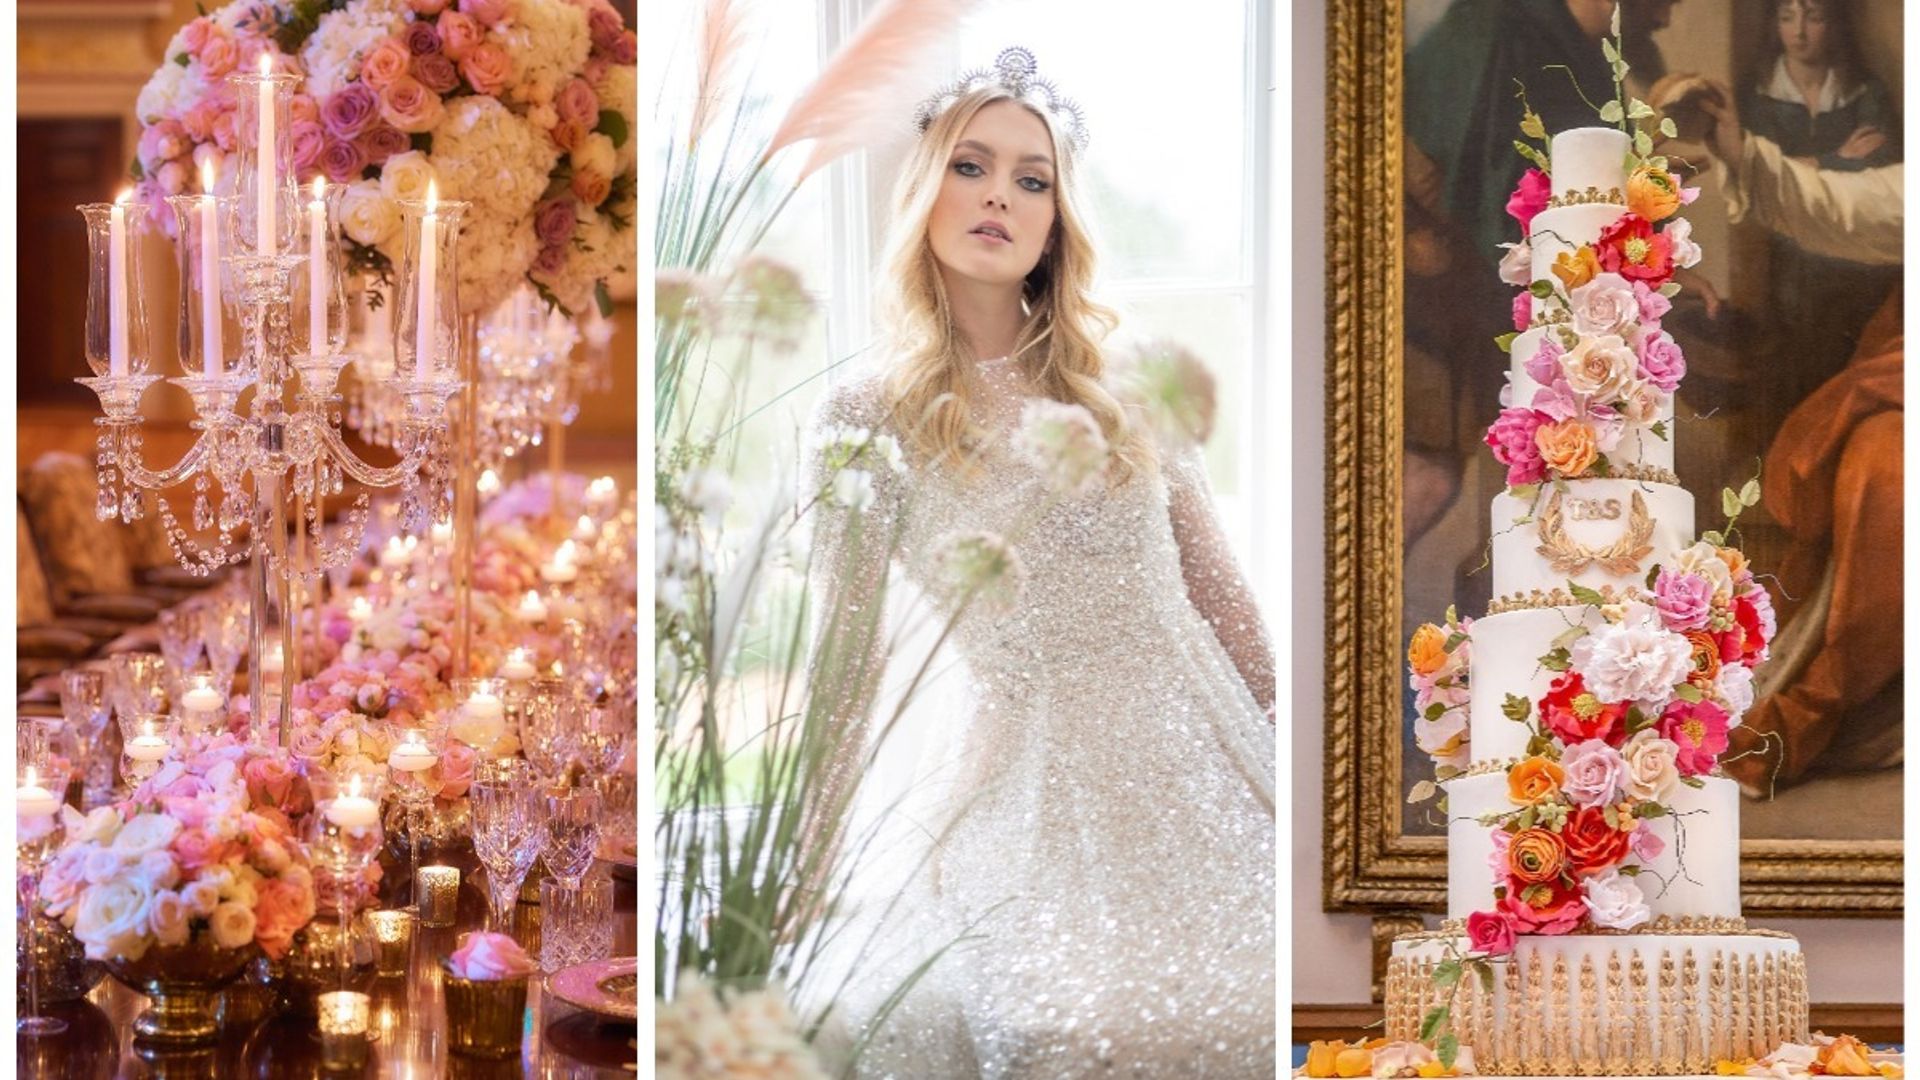 We’re giving one key worker a dream wedding worth over £100k